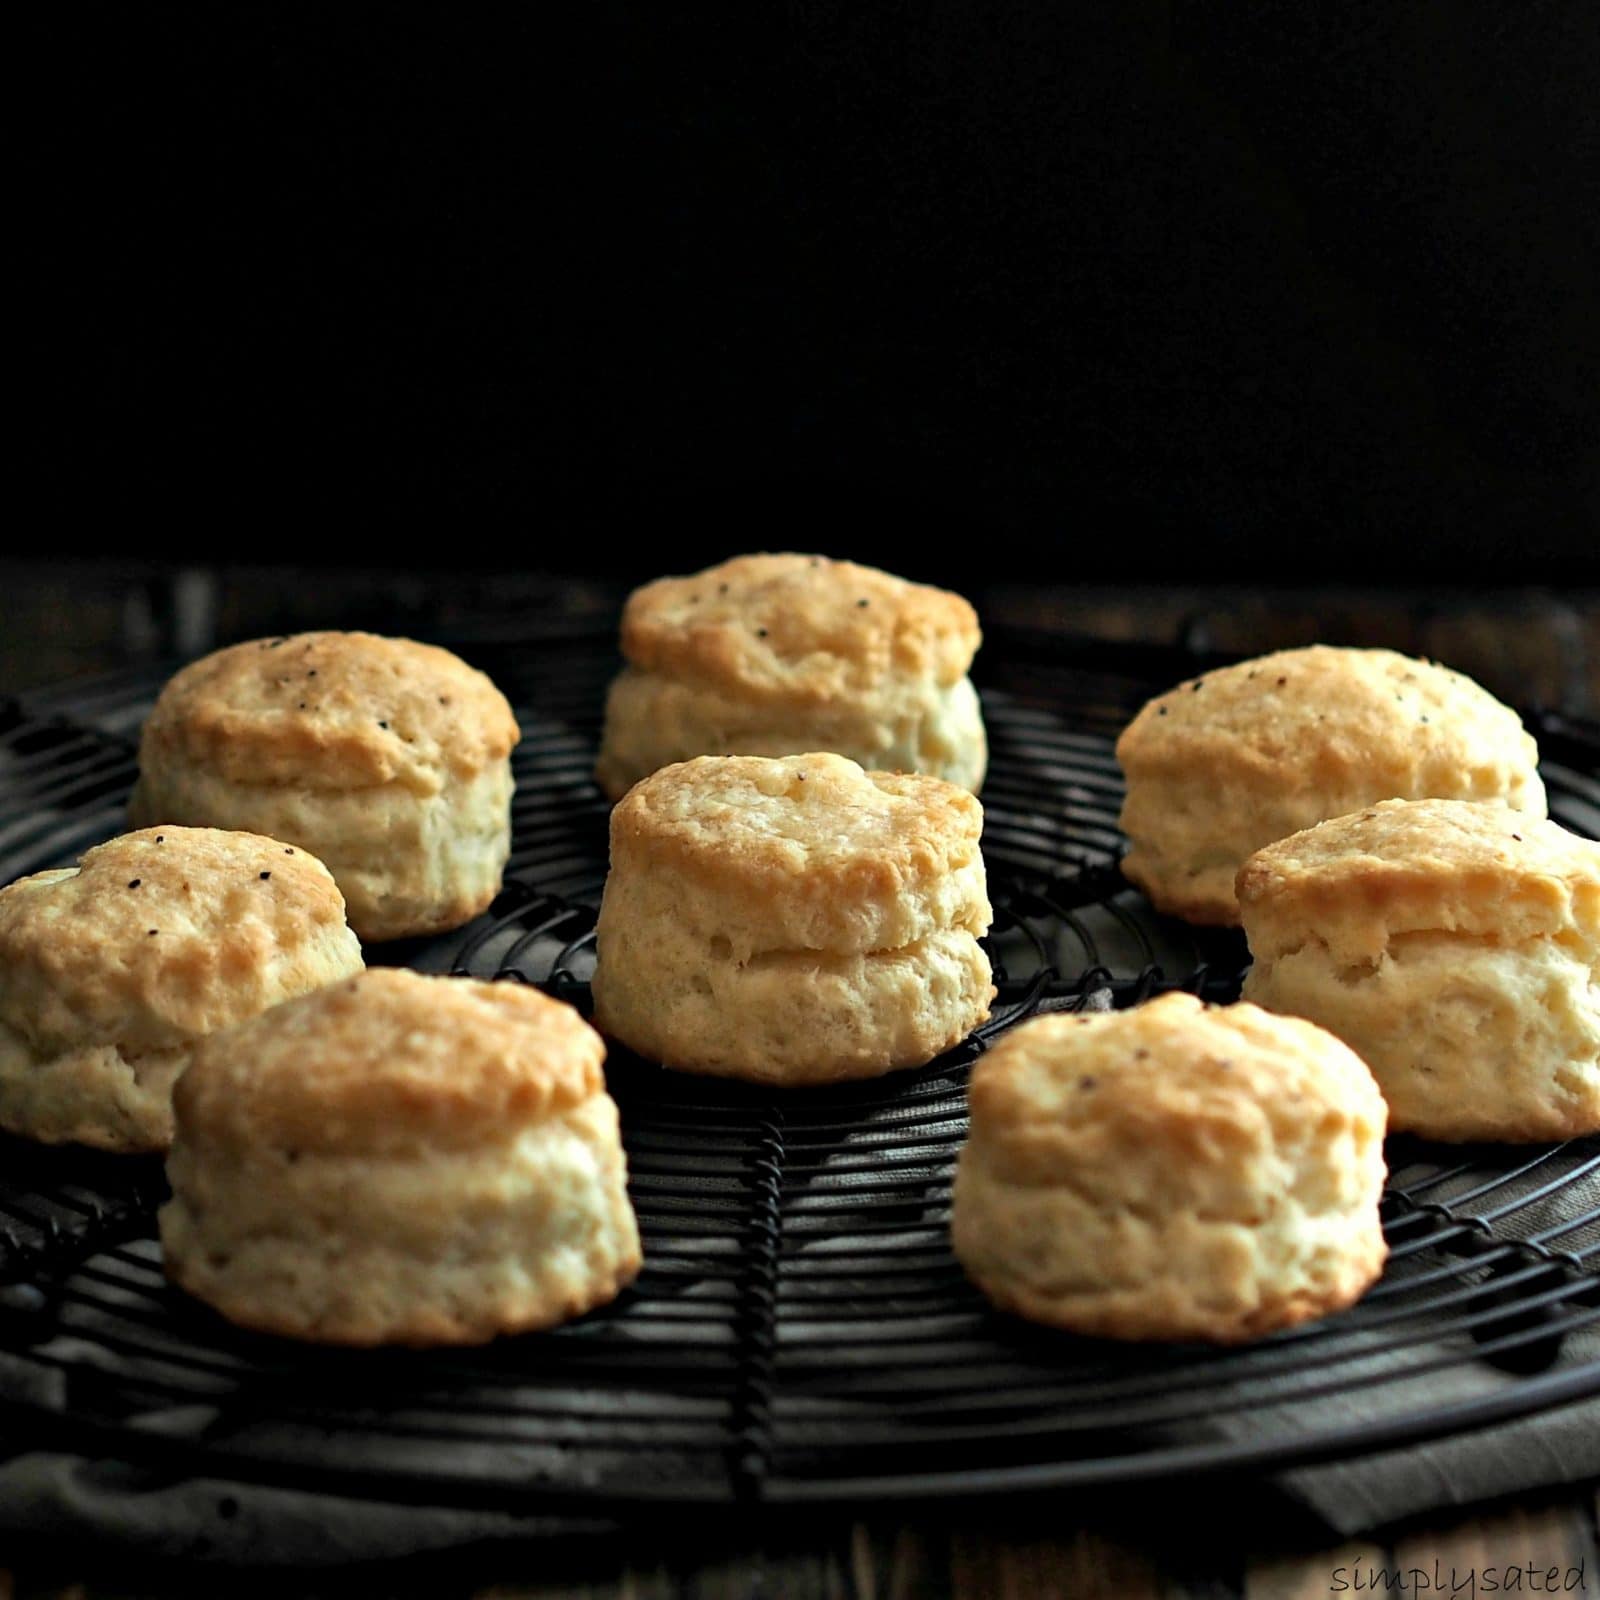 Old-Fashioned Biscuits made with White Lily, Self-Rising Flour are the perfect biscuit. Light and flavorful with a slightly crispy exterior. Simply Sated